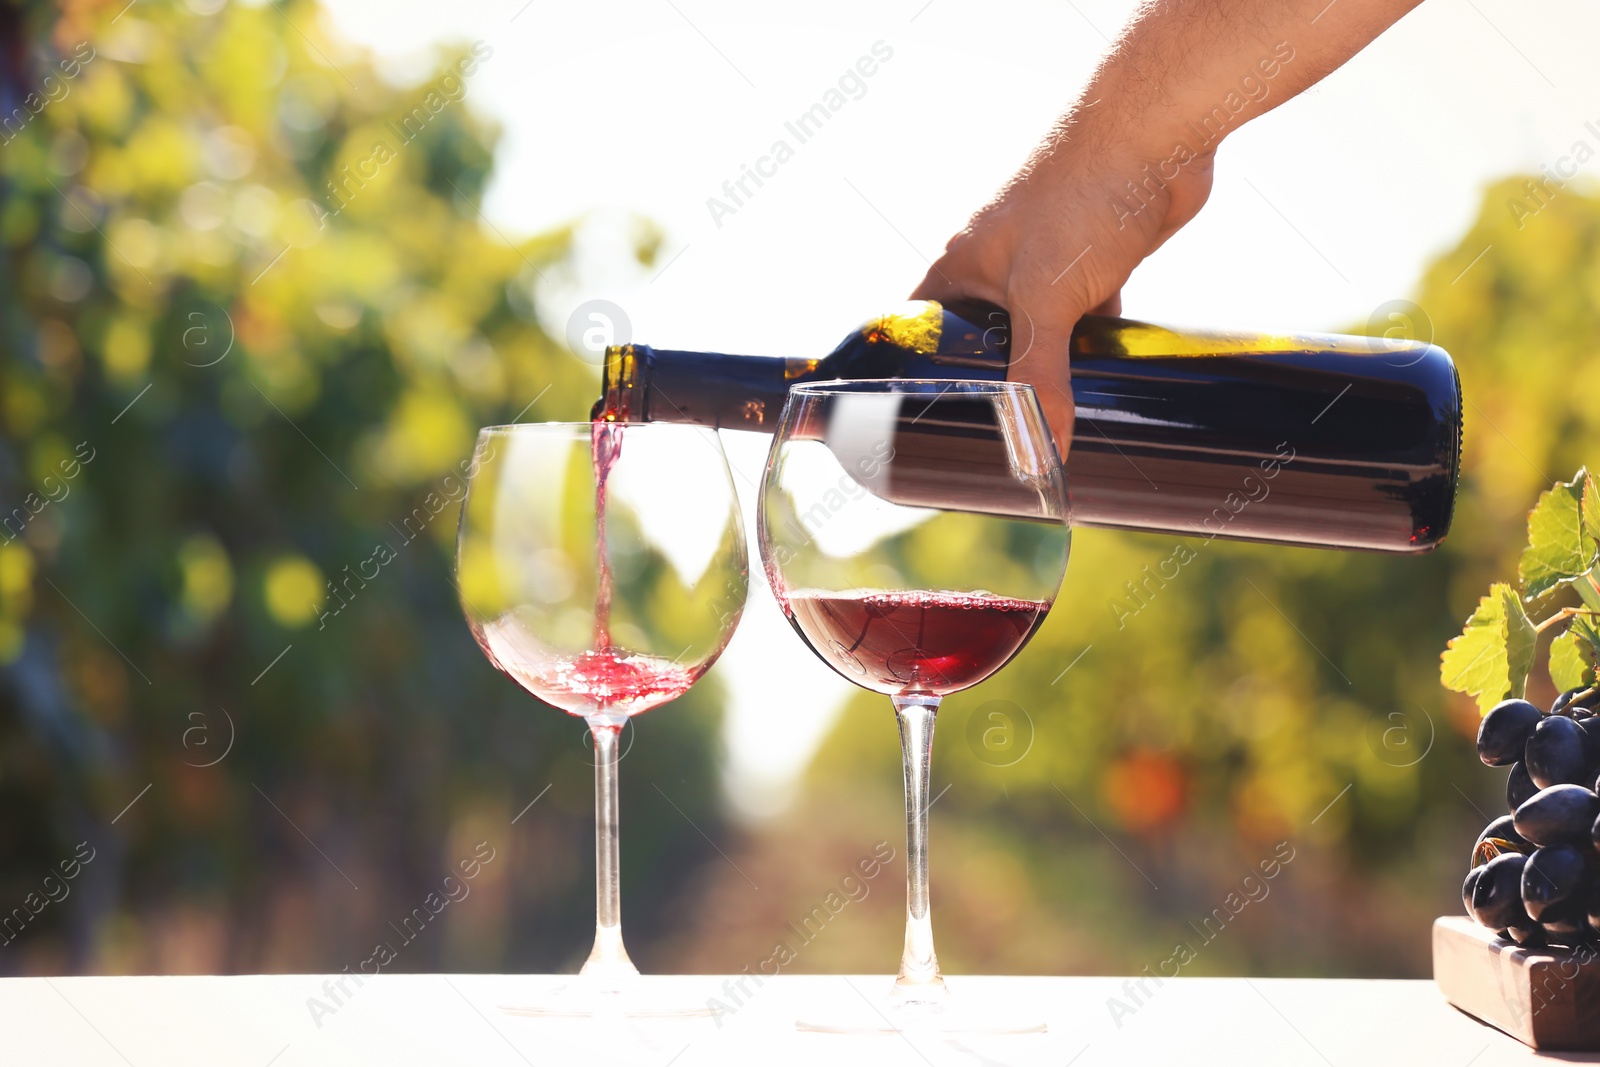 Photo of Man pouring red wine into glass on table outdoors